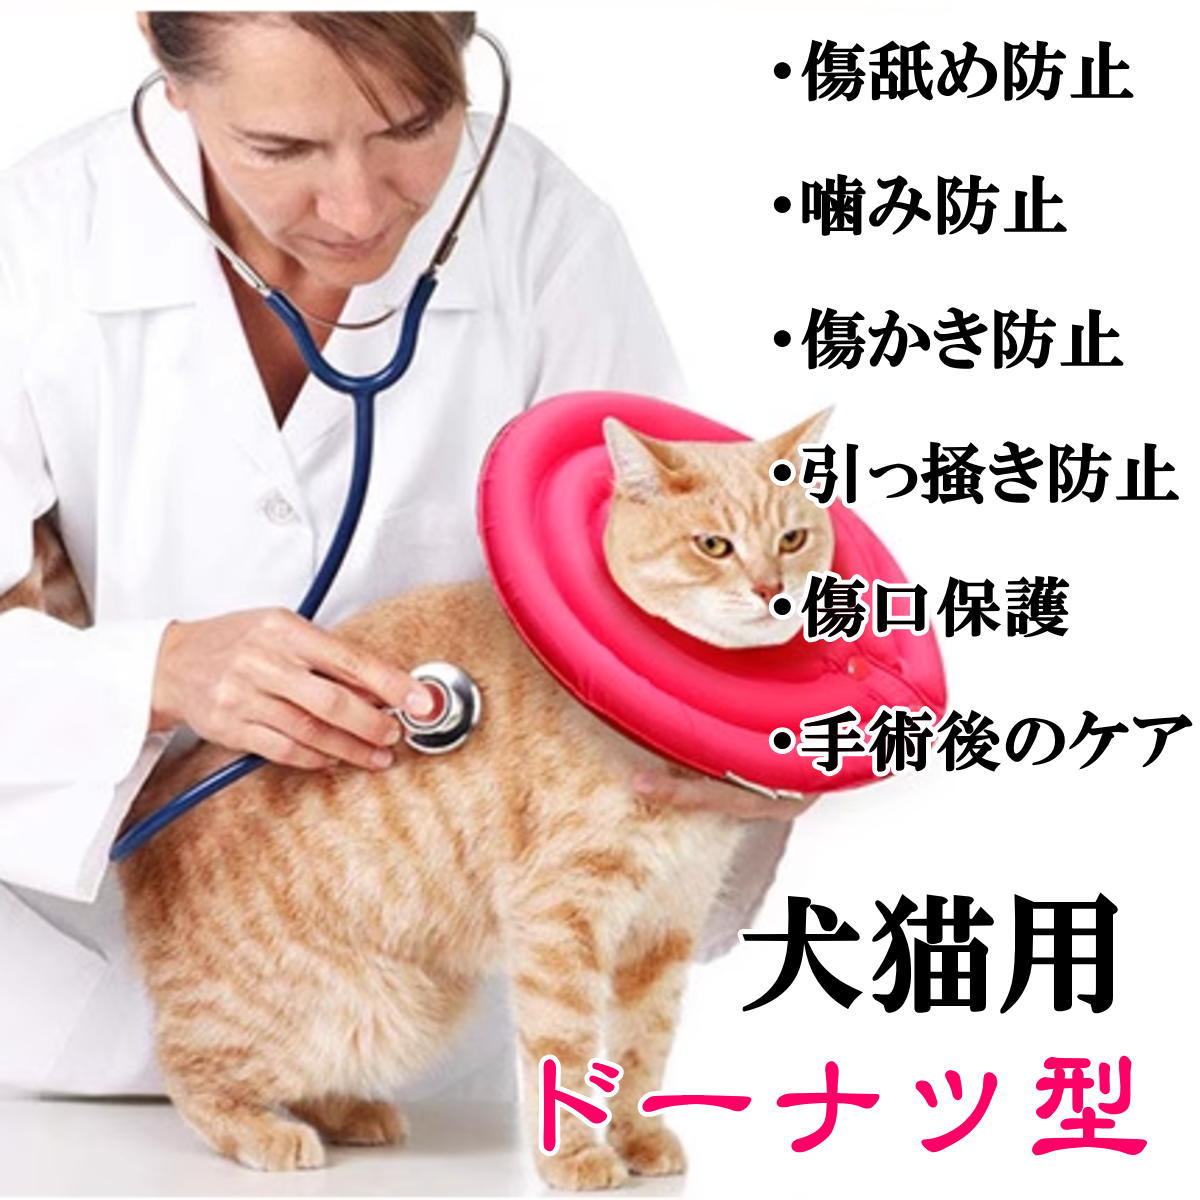  Elizabeth collar doughnuts cat small size dog wide super light weight field of vision excellent cloth made adjustment possibility soft scratch lick prevention .... prevention scratch . protection hand . after care 